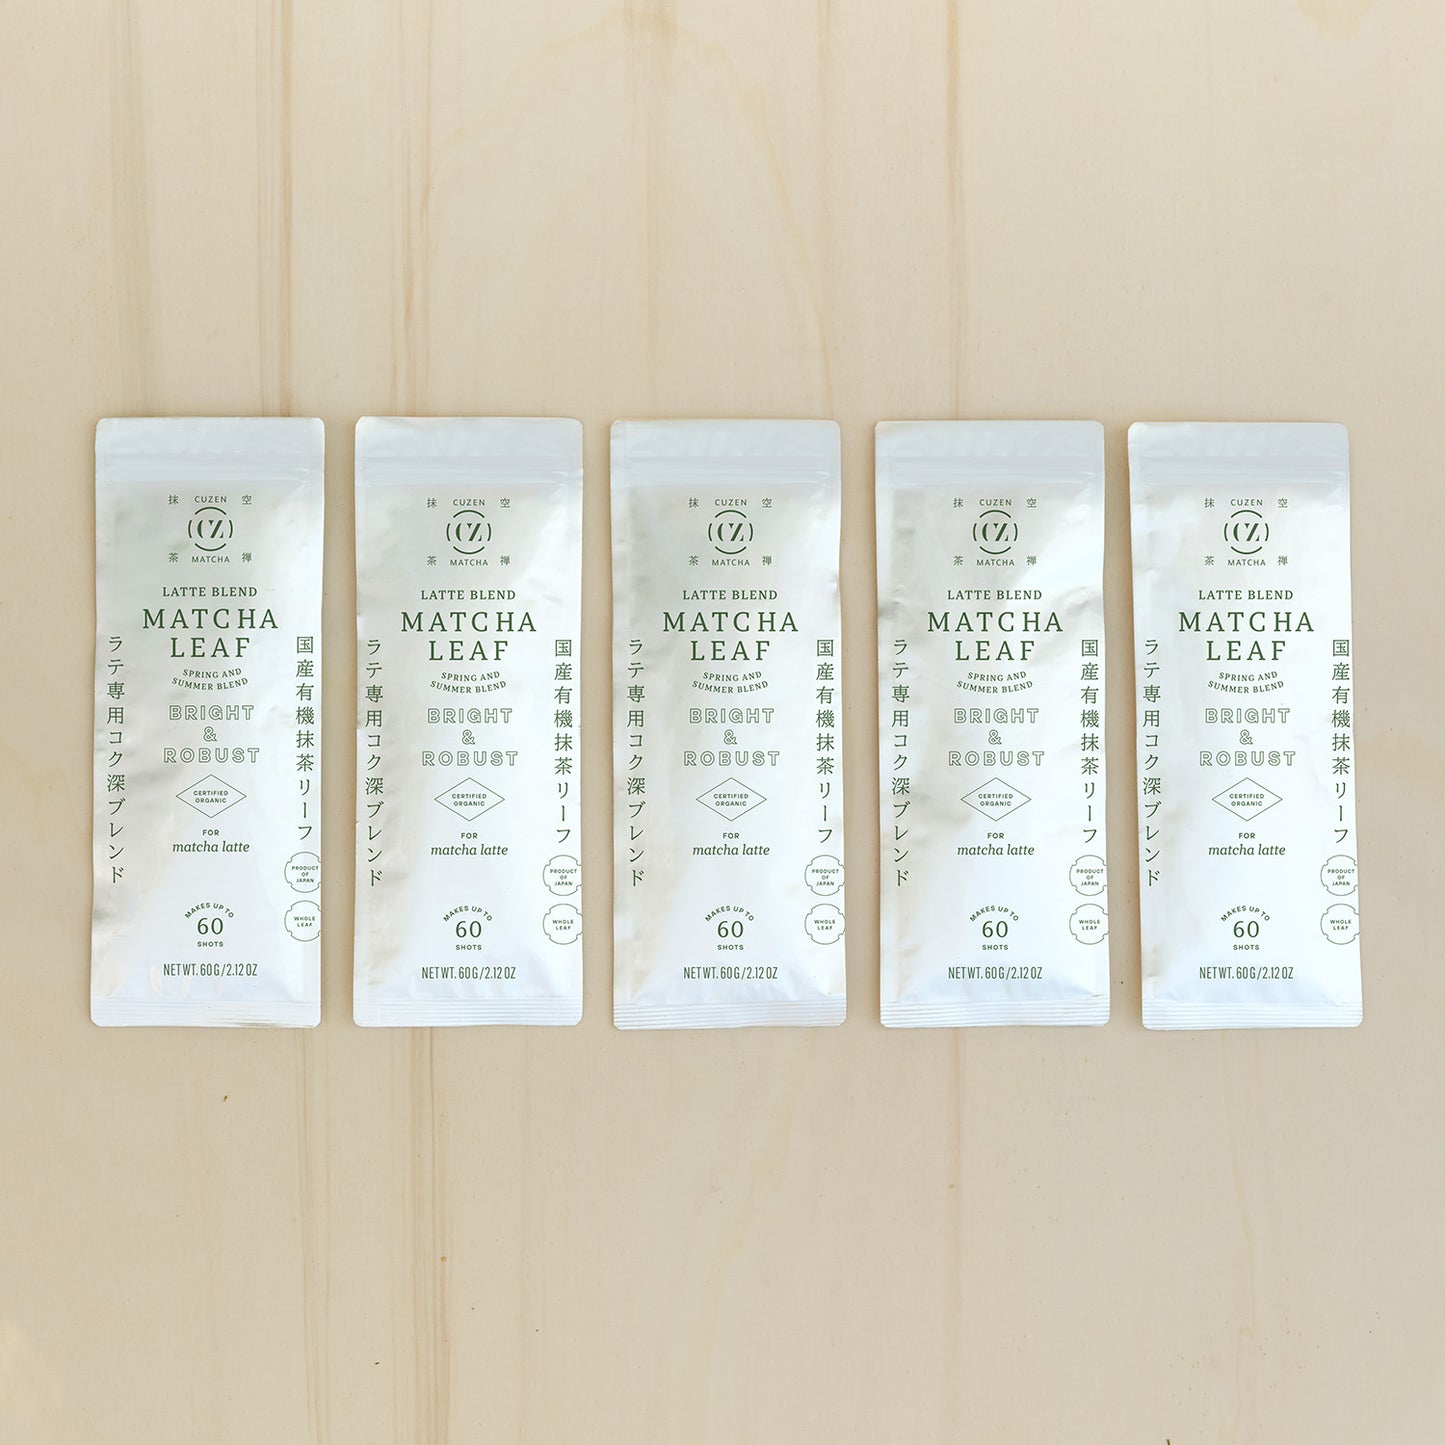 A row of five, white-colored, 60-gram packets of Cuzen’s Latte Blend Matcha Leaf.